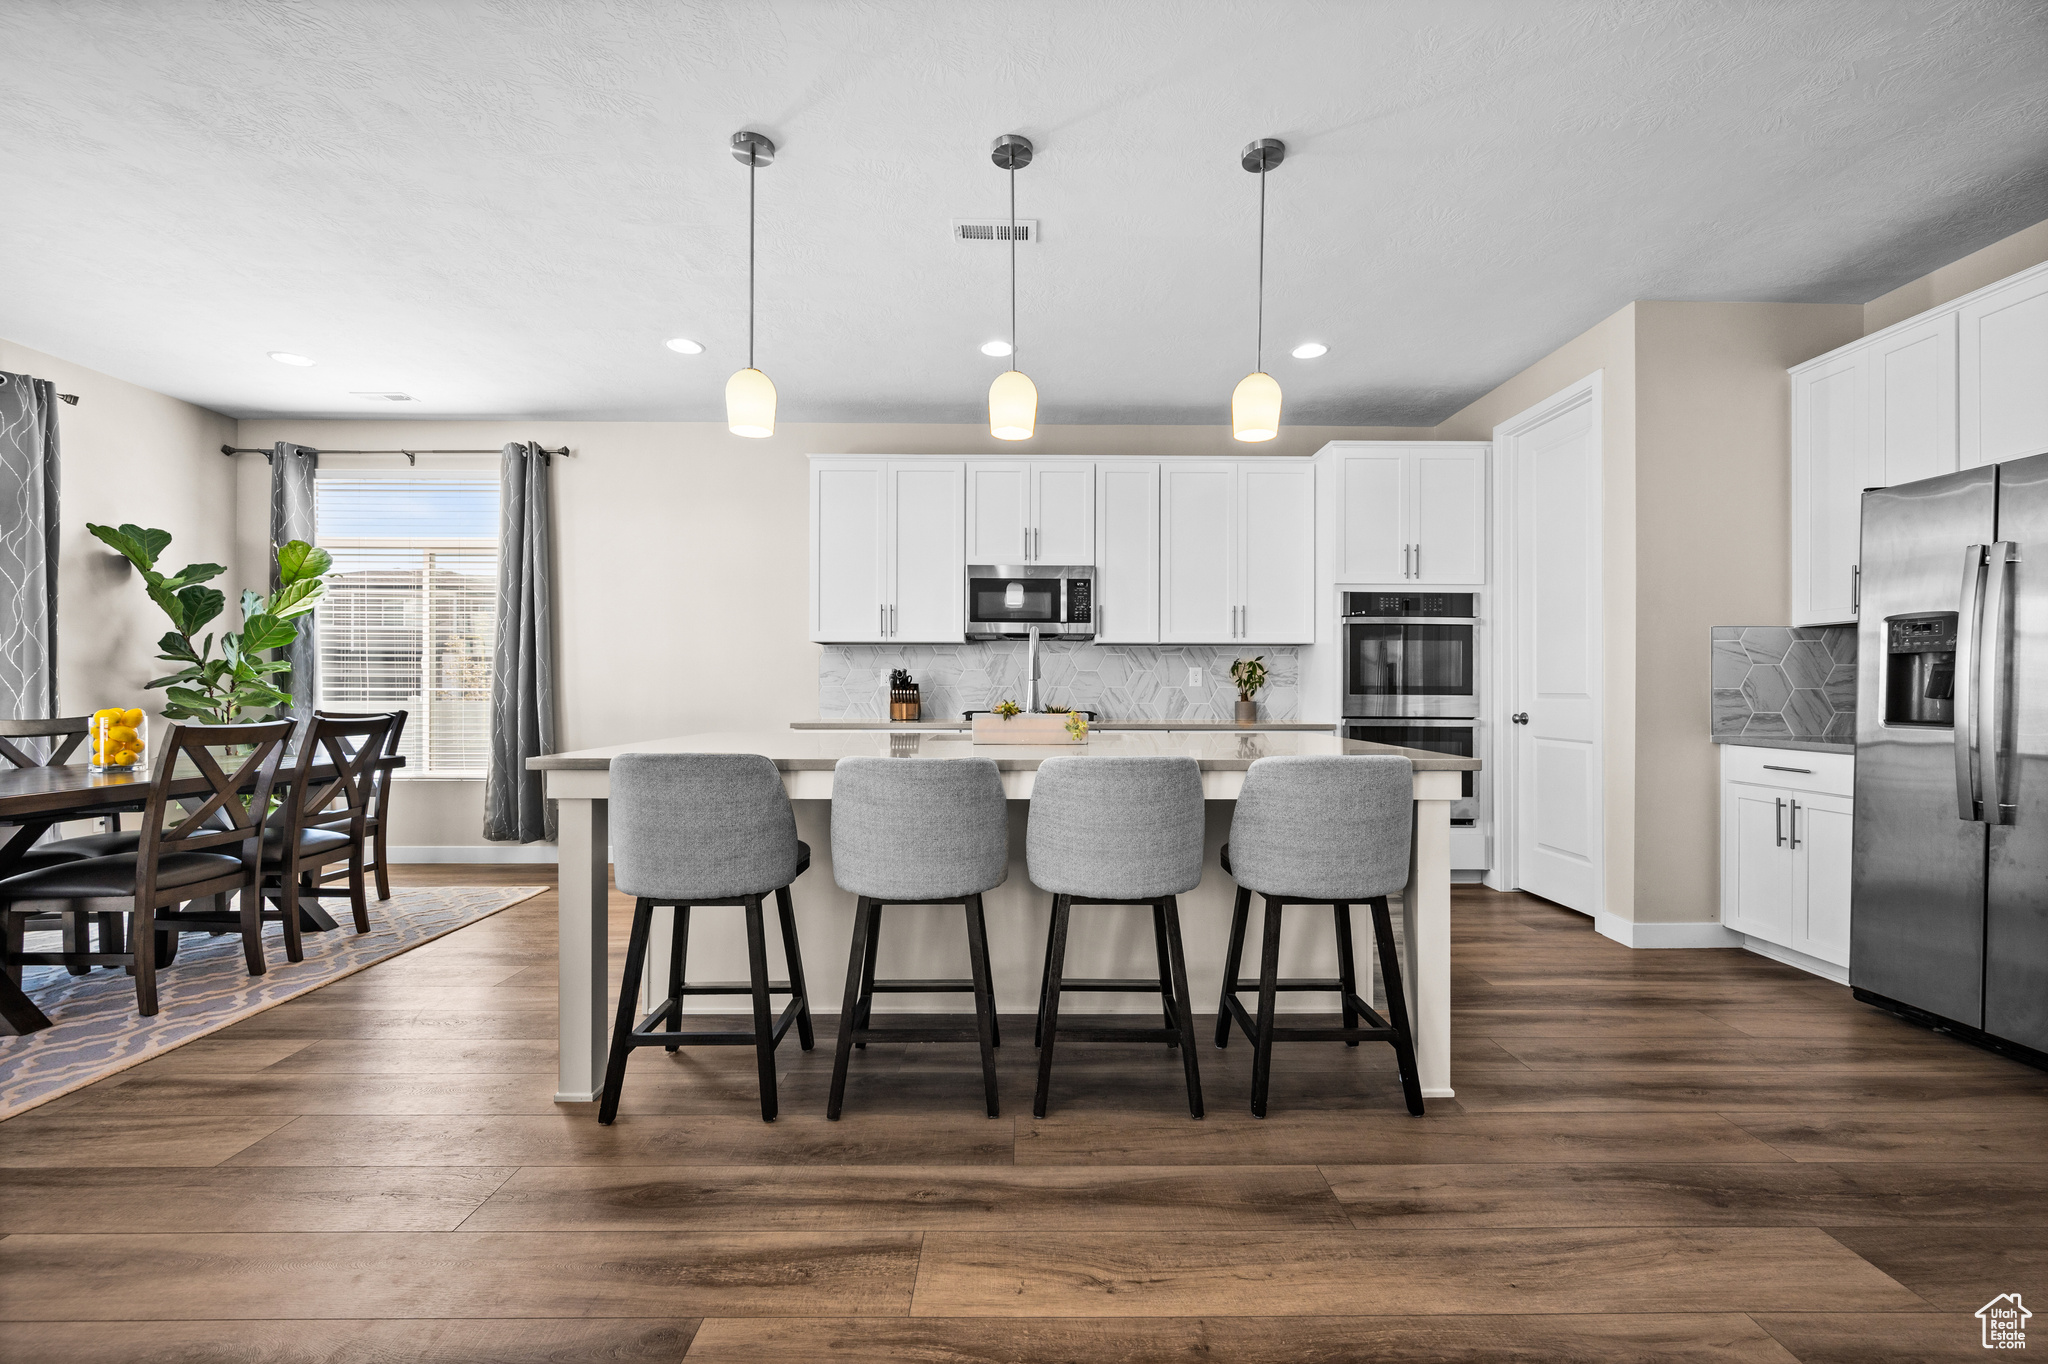 Kitchen featuring backsplash, appliances with stainless steel finishes, and decorative pendant lighting.